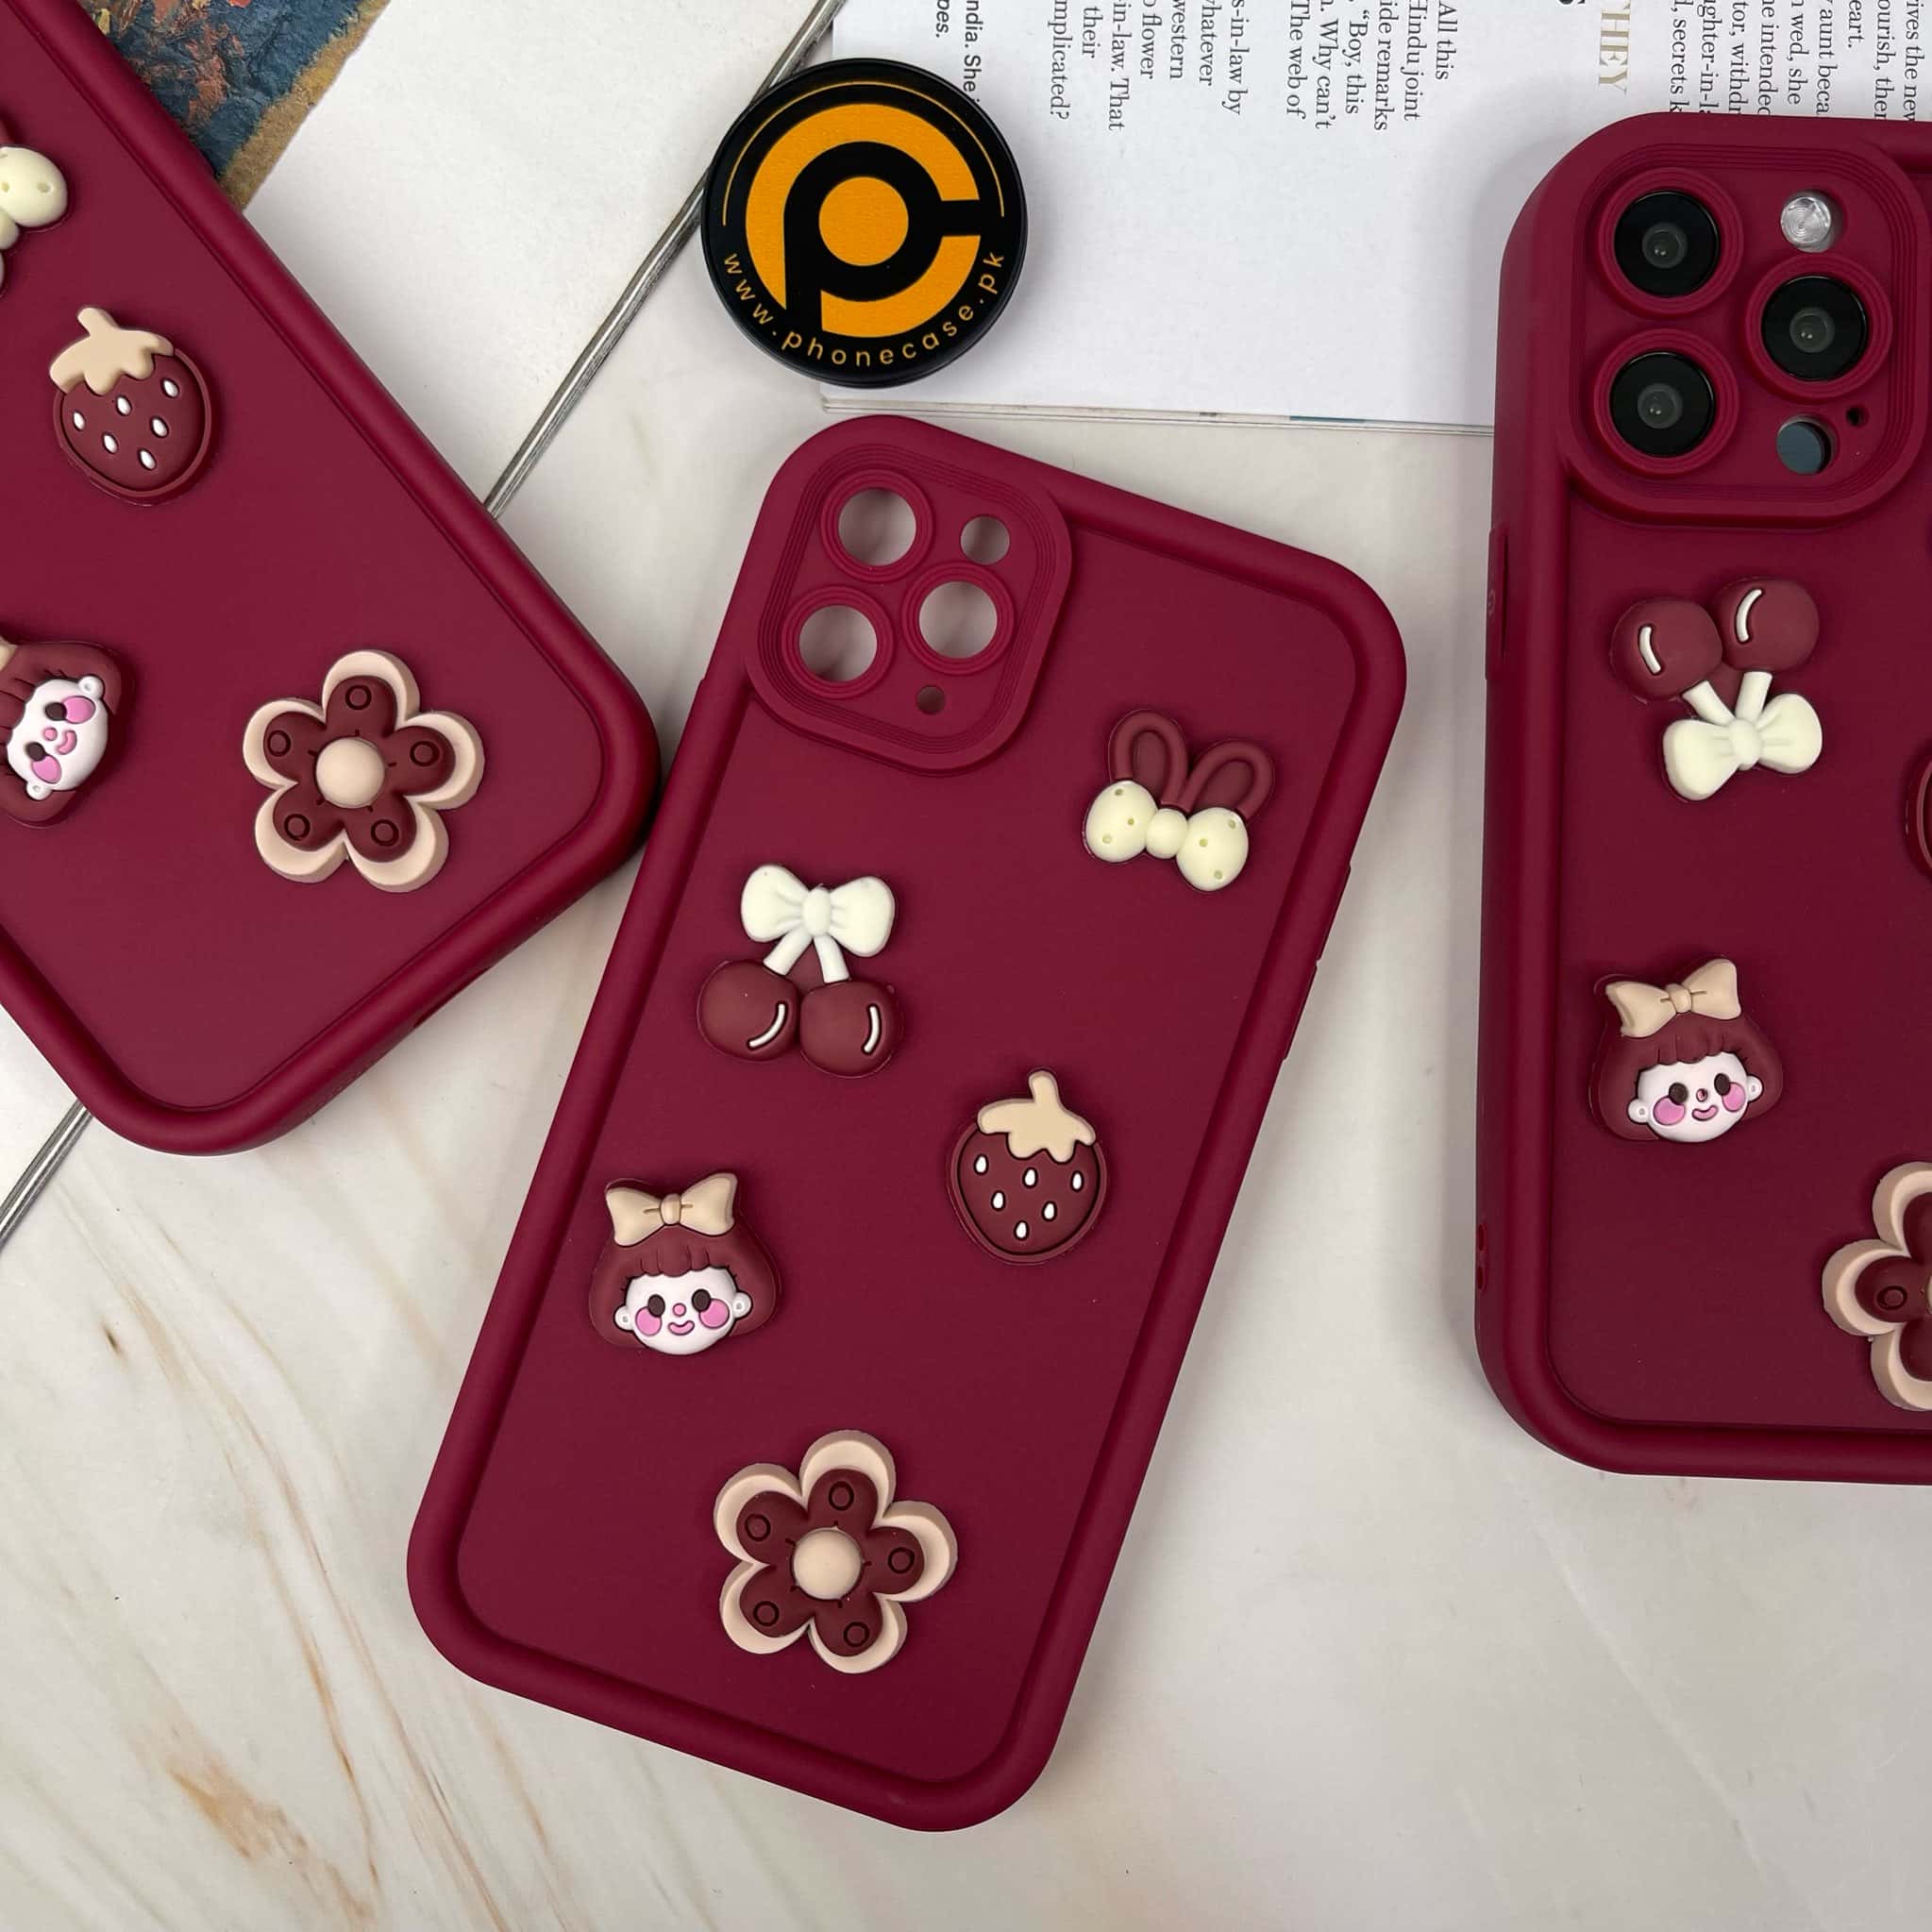 iPhone 11 Pro Max Cute 3D Cherry Flower Icons Silicon Case